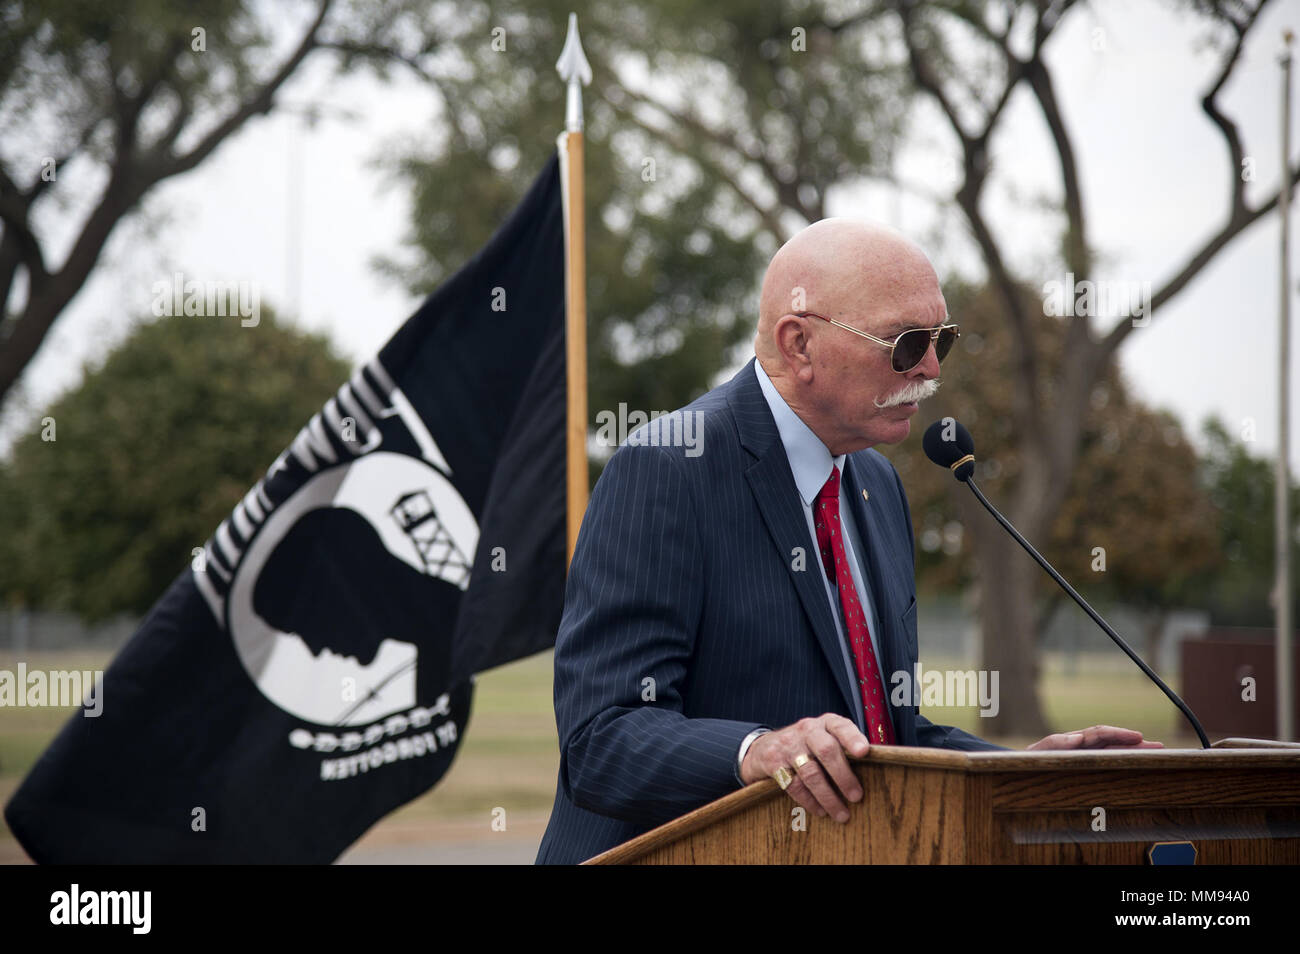 Lt. Col. Retired William R. Schwertfeger speaks at a POW/MIA ceremony on Sept. 9, 2017 at the Vance Air Force Base flagpole. Schwertfeger, an F-4 pilot during the Vietnam war, was held as a prisoner of war in 1972 for 407 days in the “Hanoi Hilton” prison in Vietnam. (U.S. Air Force Photo by Airman Zachary Heal) Stock Photo